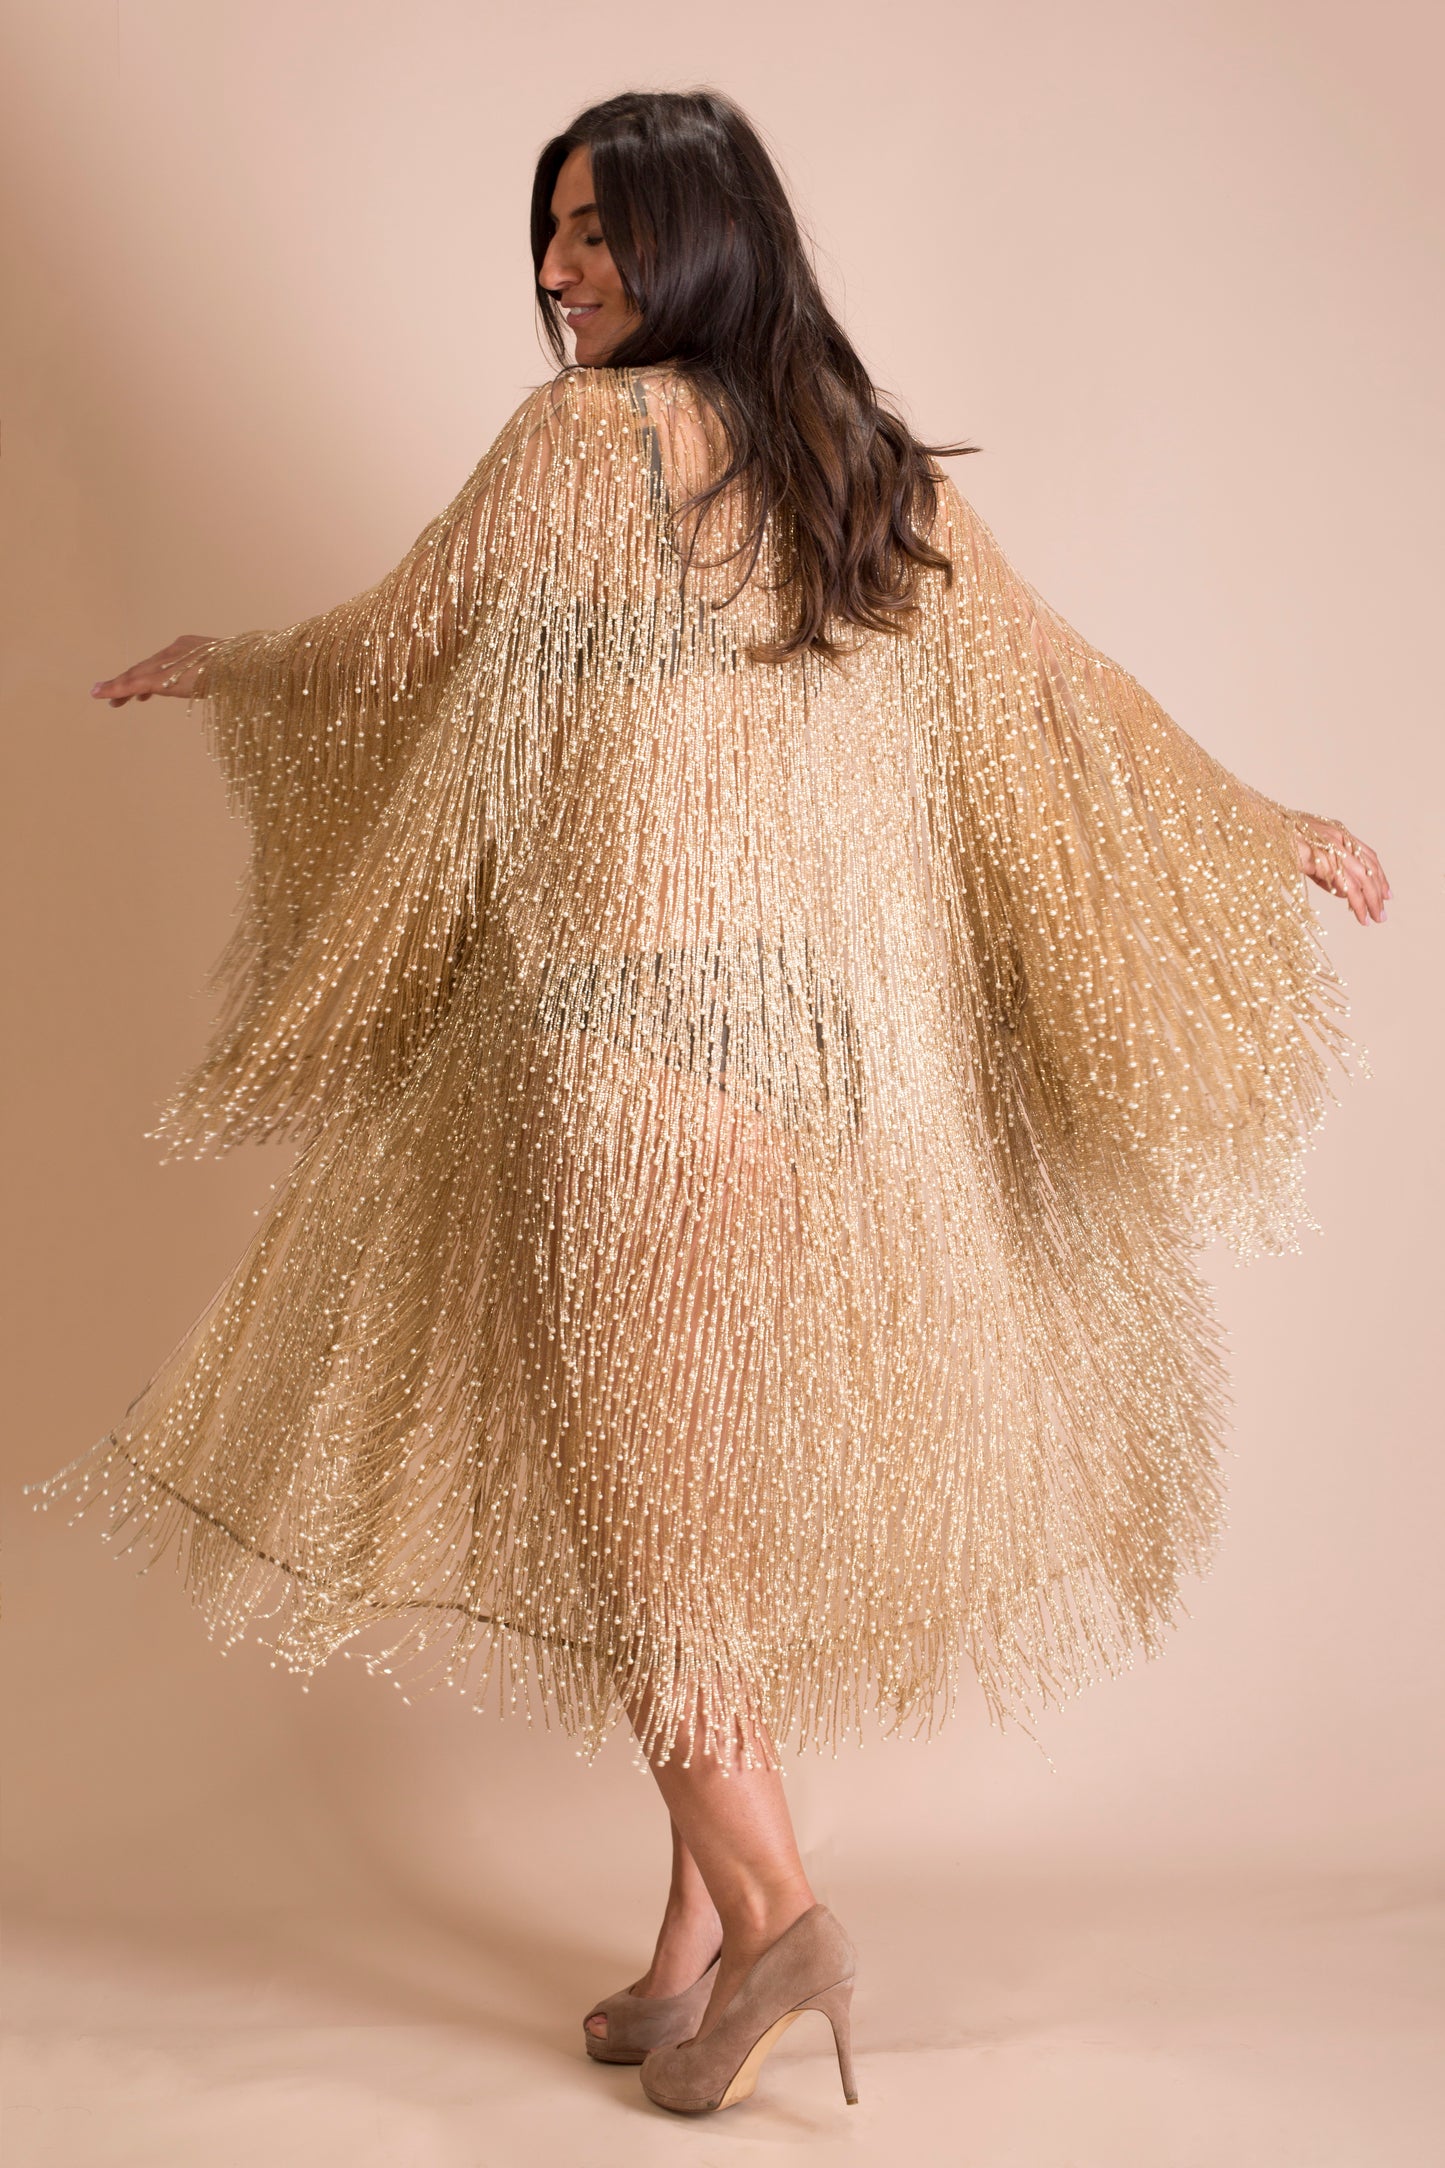 Robe covered in gold and pearl beaded strands spinning around